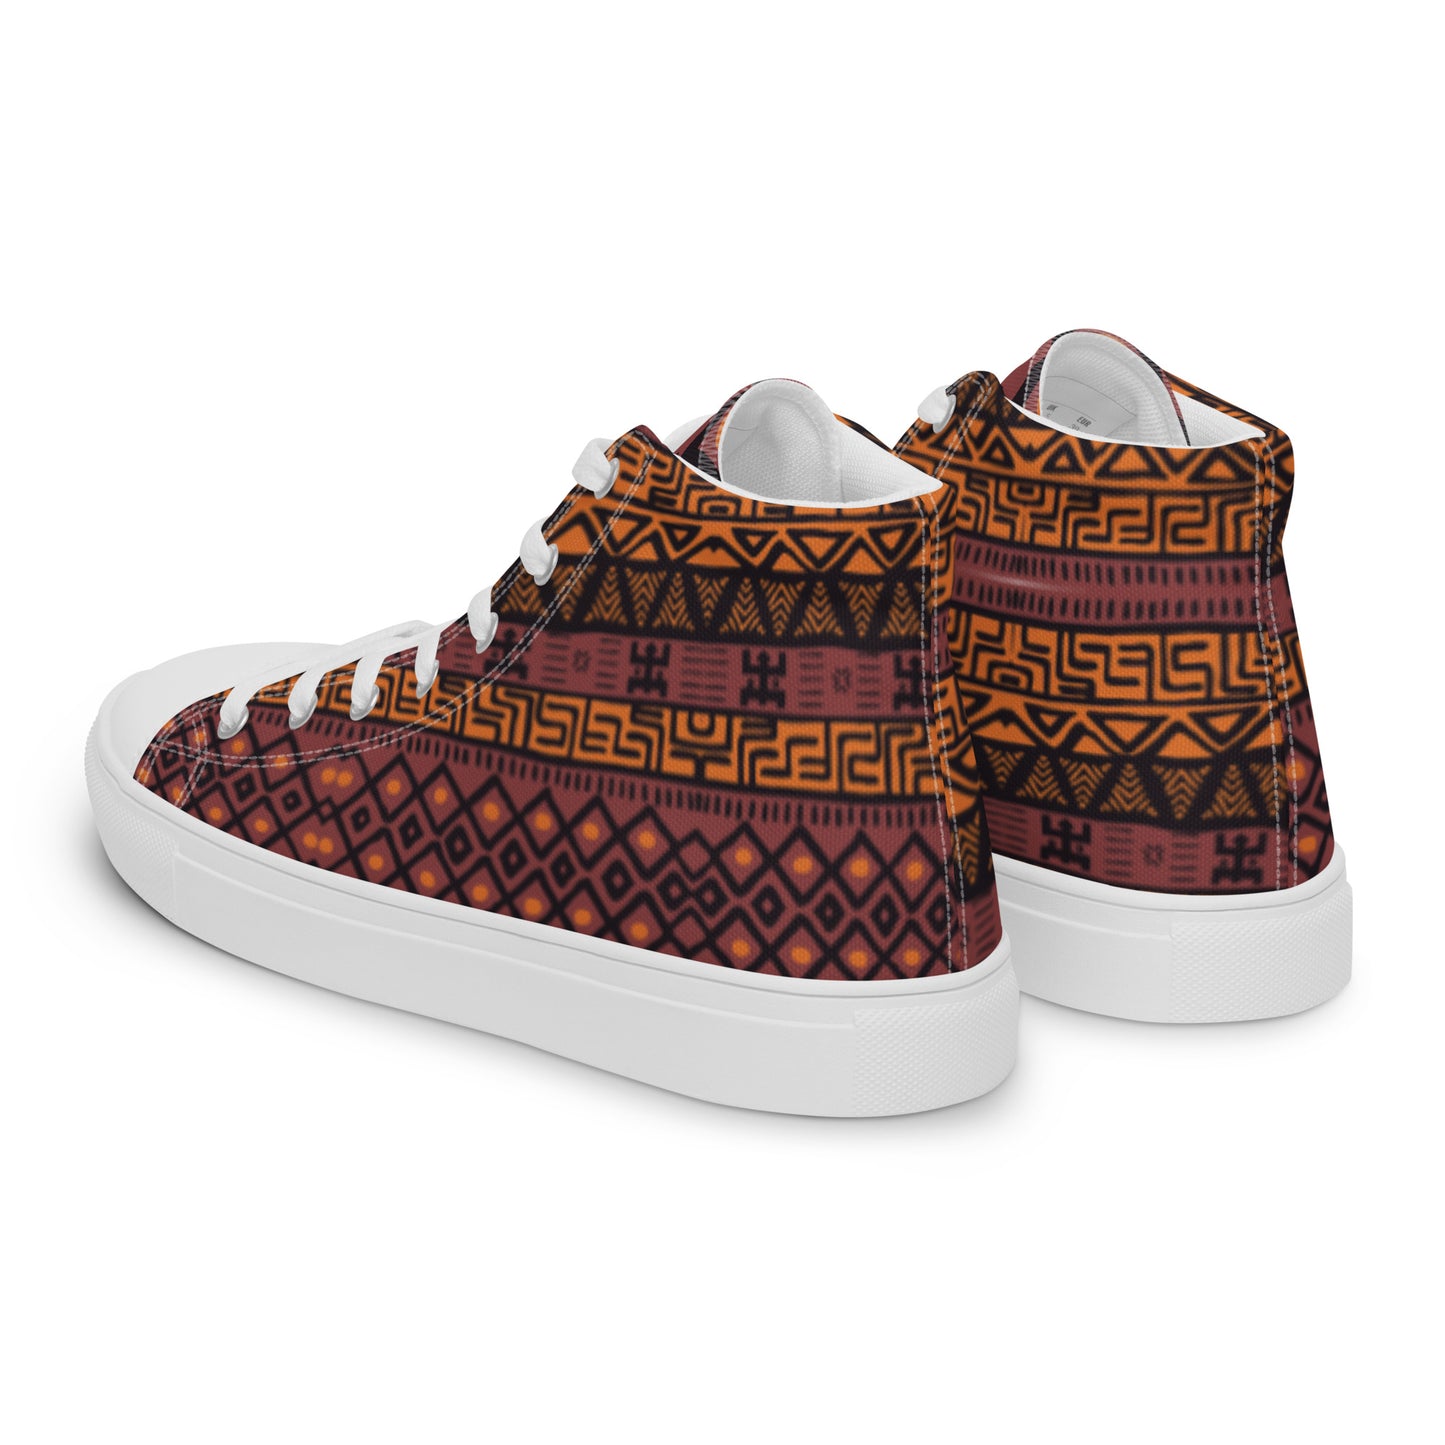 AZONTO Women’s high top canvas shoes